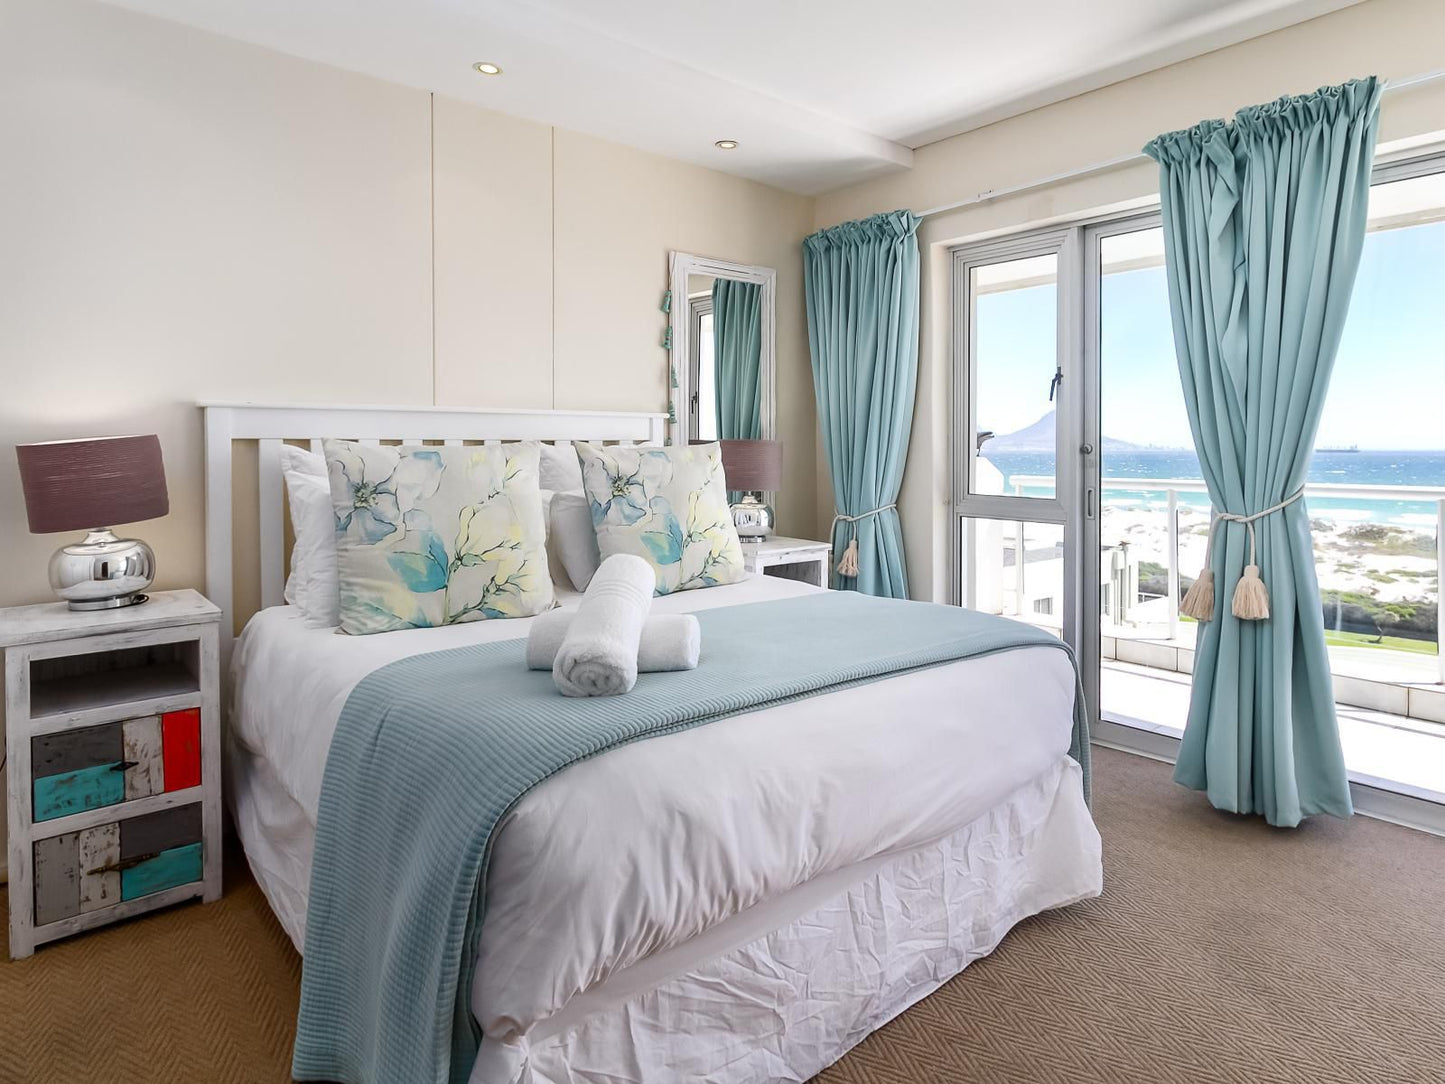 Dolphin Beach C105 By Hostagents Blouberg Cape Town Western Cape South Africa Bedroom